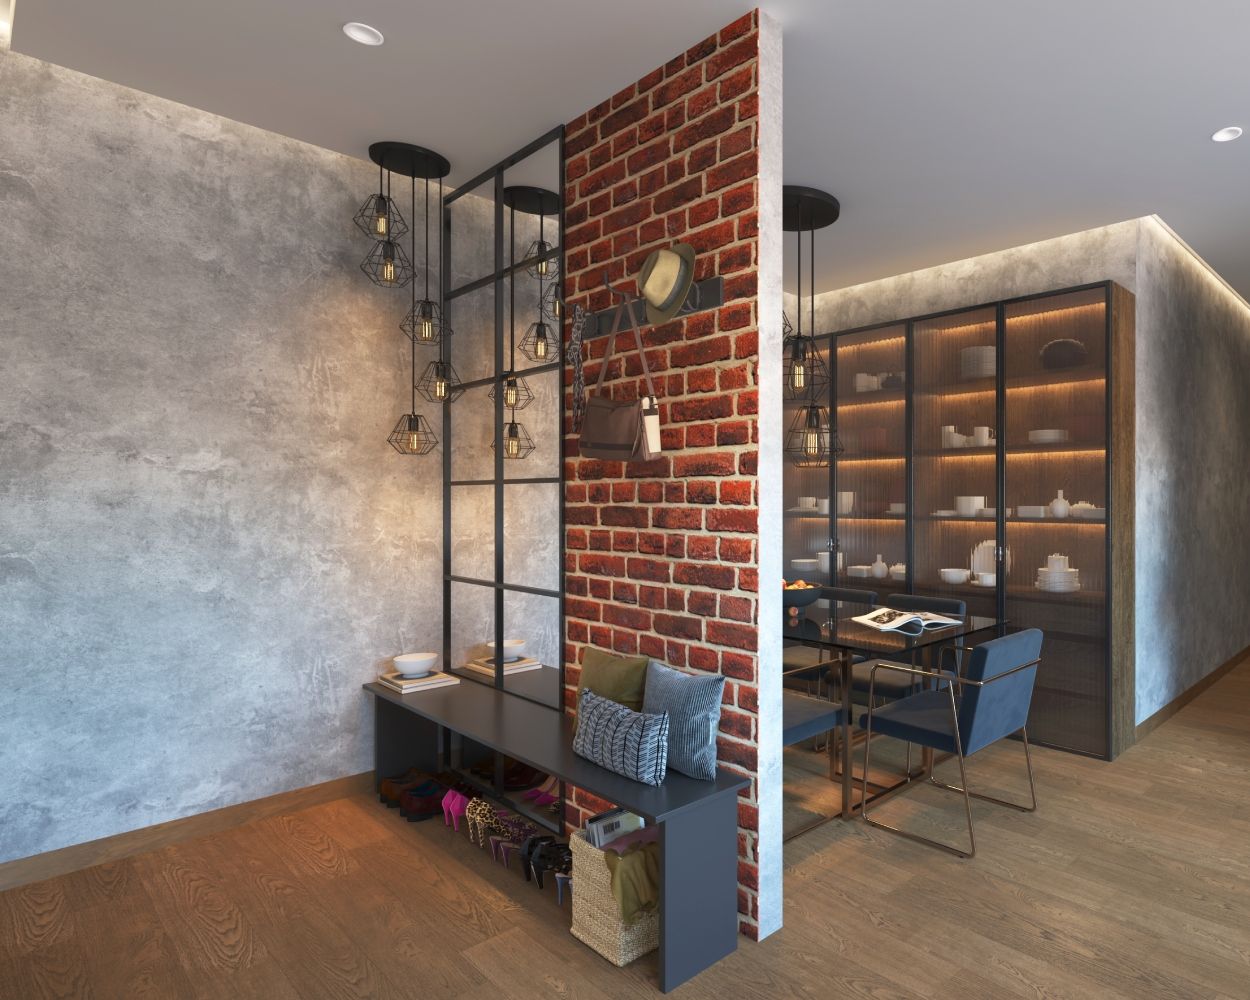 Industrial Foyer Design With Brick Wallpaper And Black Pendant Lights